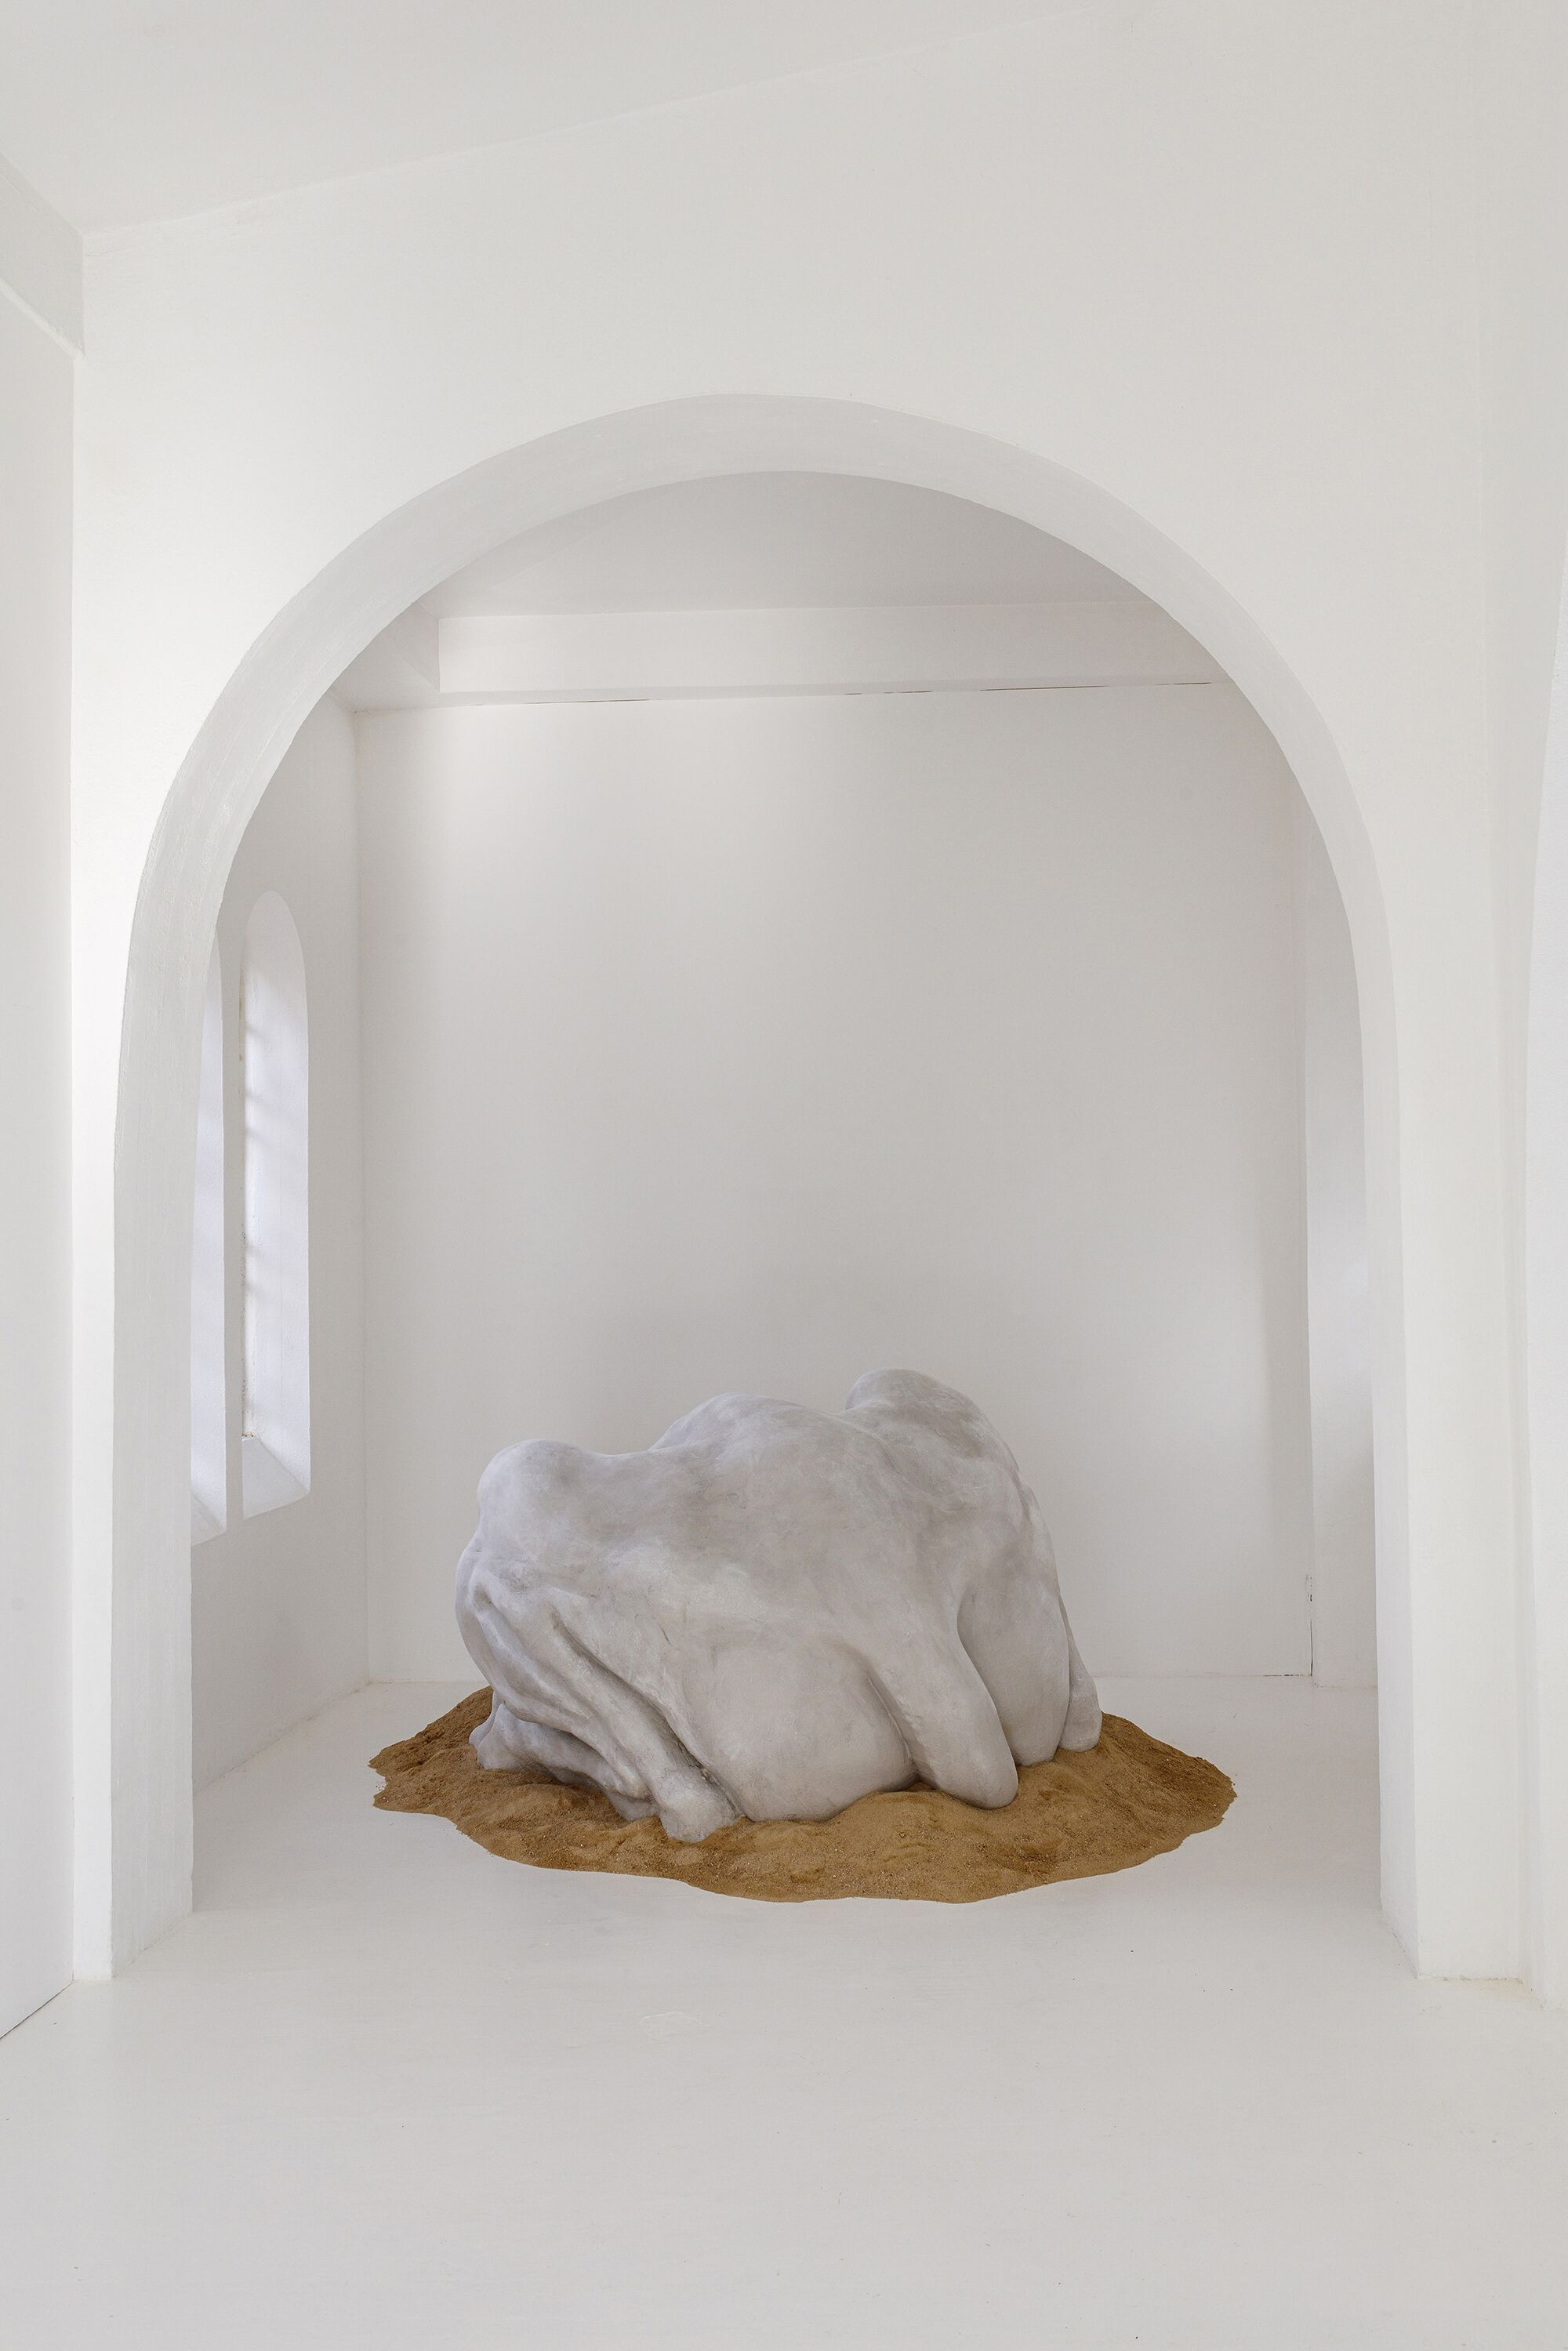 Zuzanna Czebatul, Their New Power (Back), 2020. Polystyrene, acrylic and sand, 60×150 x 105 cm. From the exhibition &#39;The Singing Dunes’, CAC-La synagogue de Delme